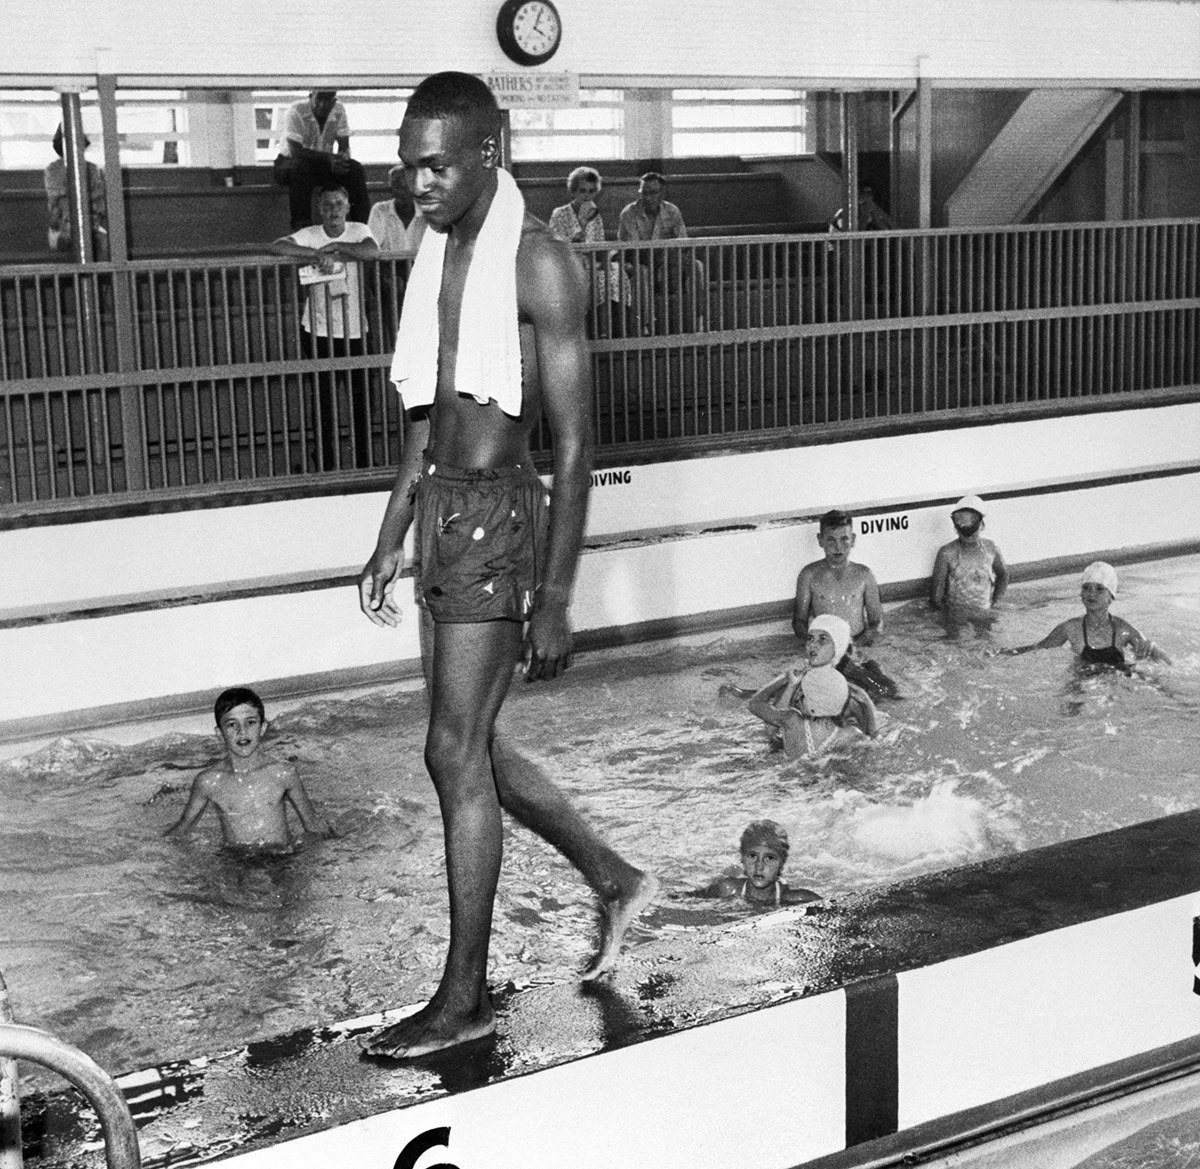 David Isom, 19, broke the color line in one of this city's segregated public pools on June 8, 1958, which resulted in officials closing the facility.